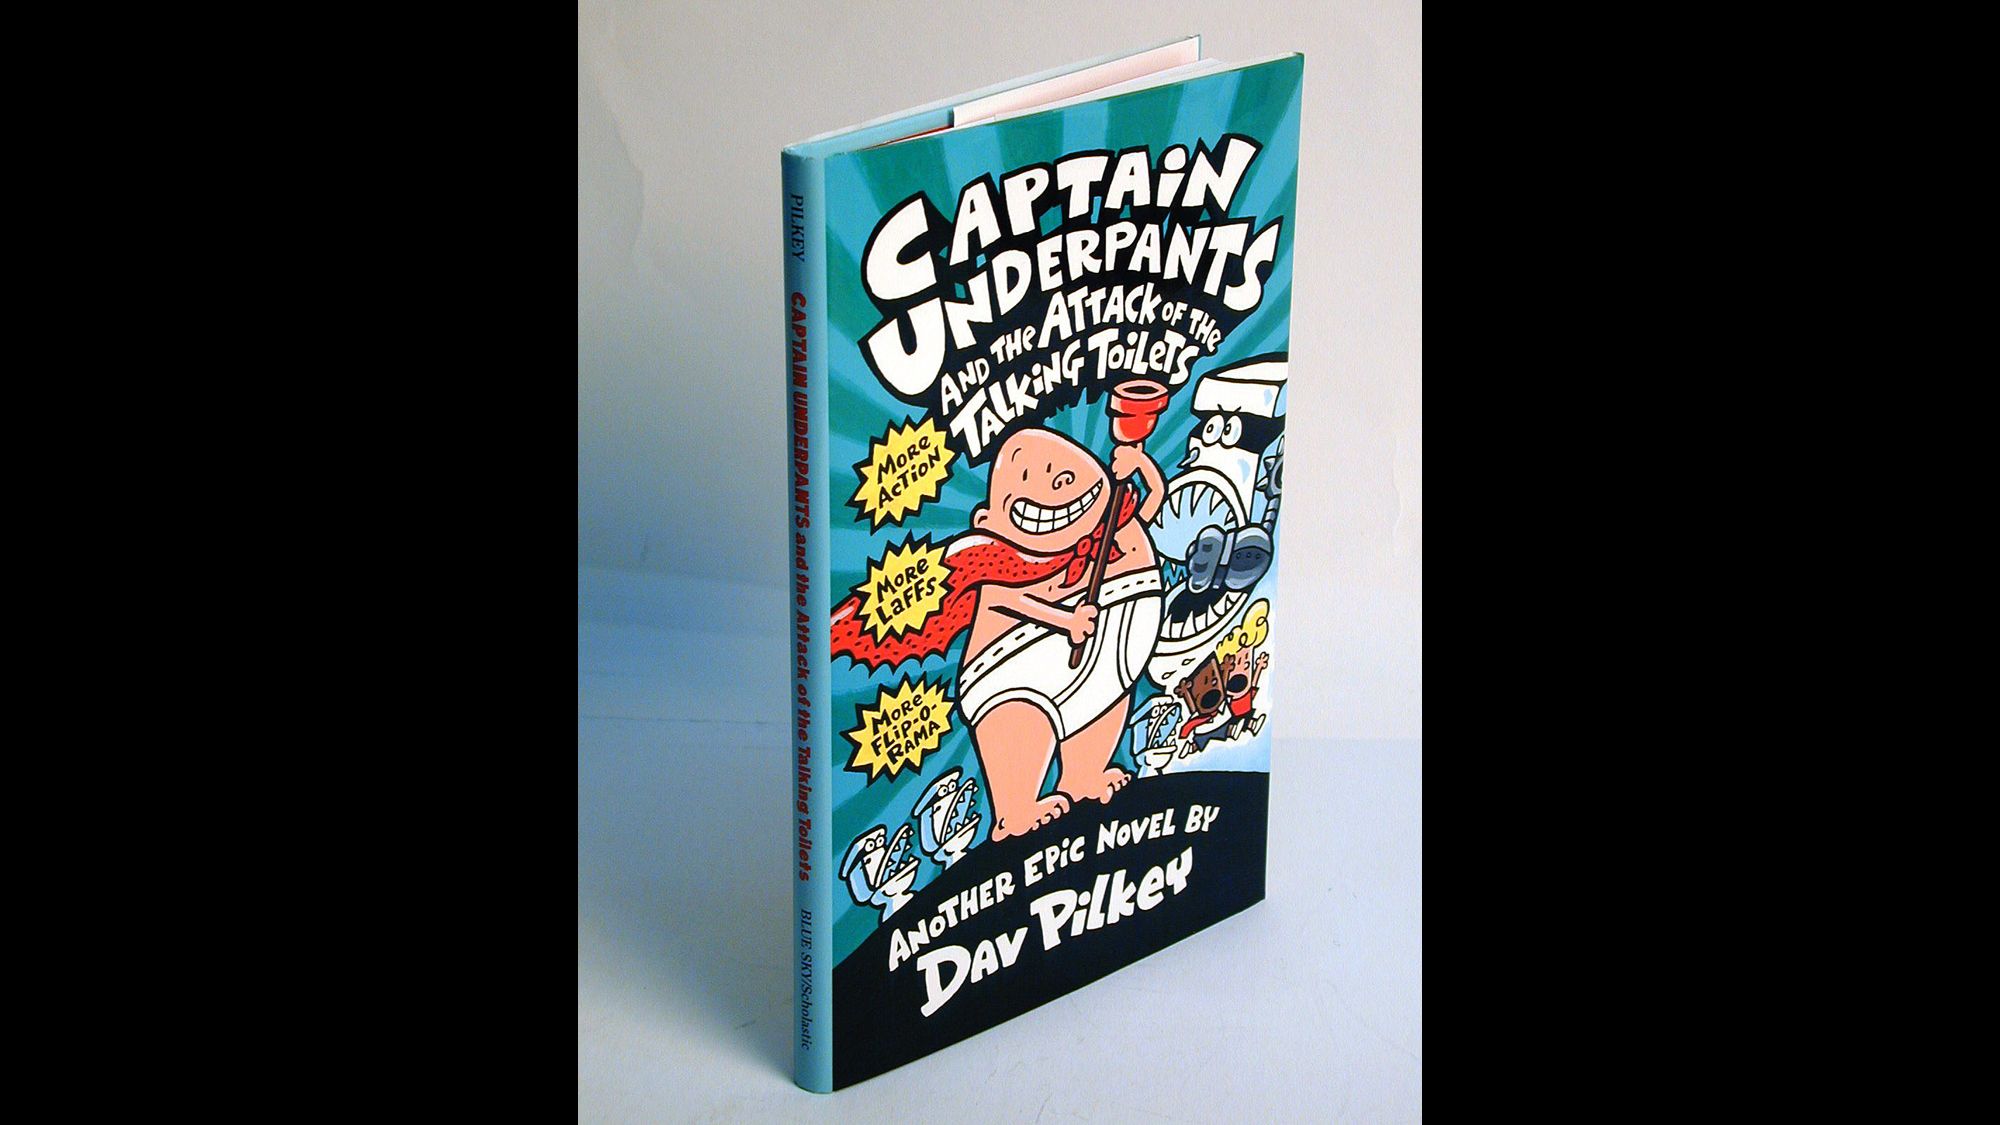 Captain Underpants' tops list of most challenged books in 2013